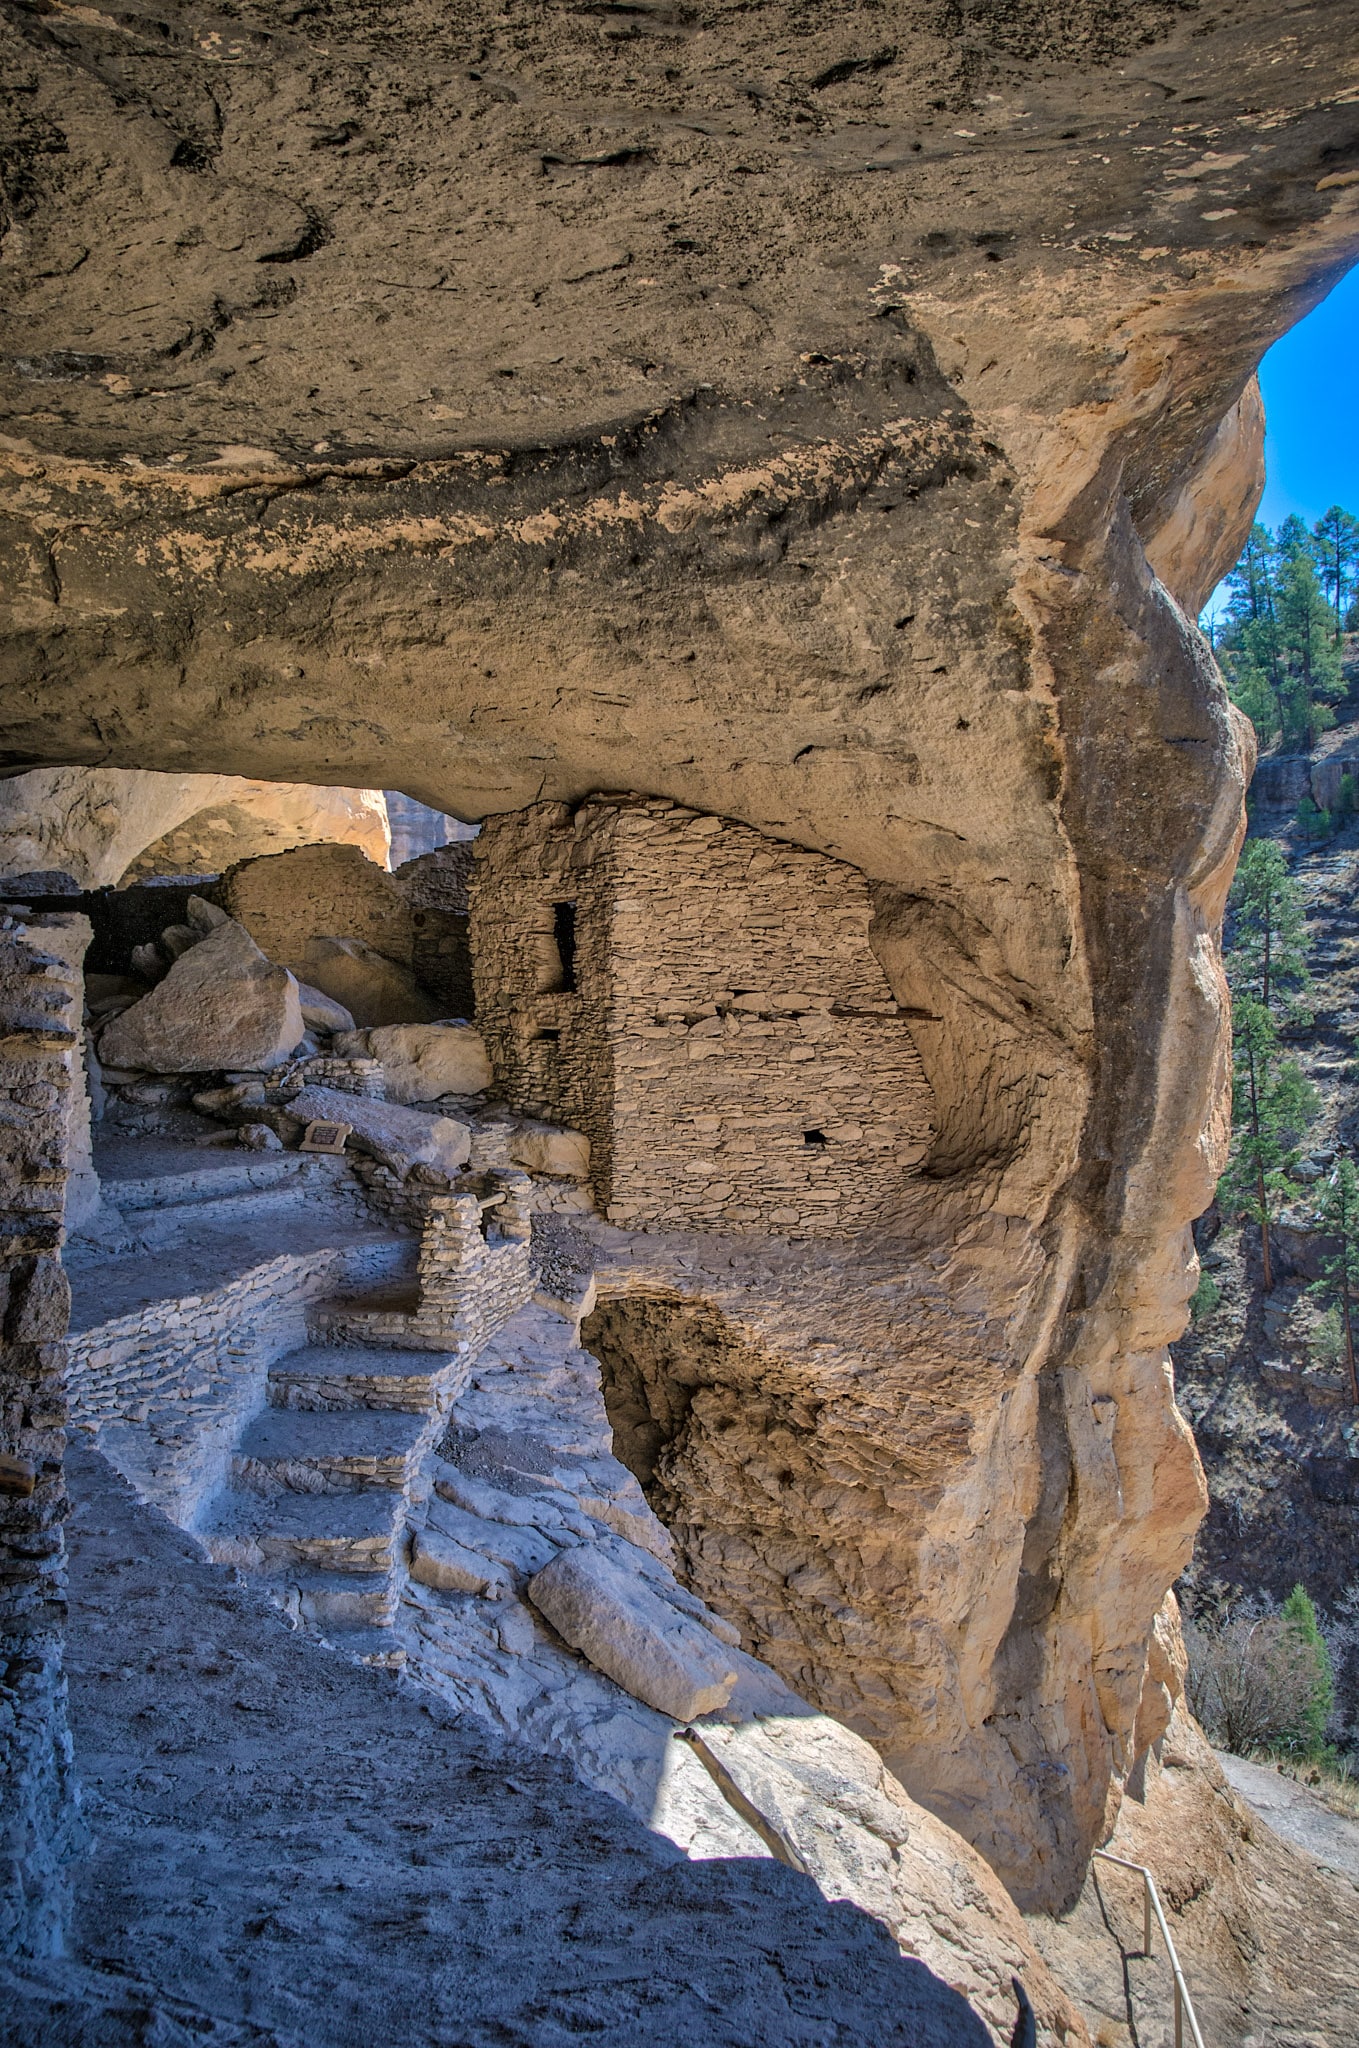 This is a view from within the Gila Cliff Dwellings looking out to the canyon beyond.